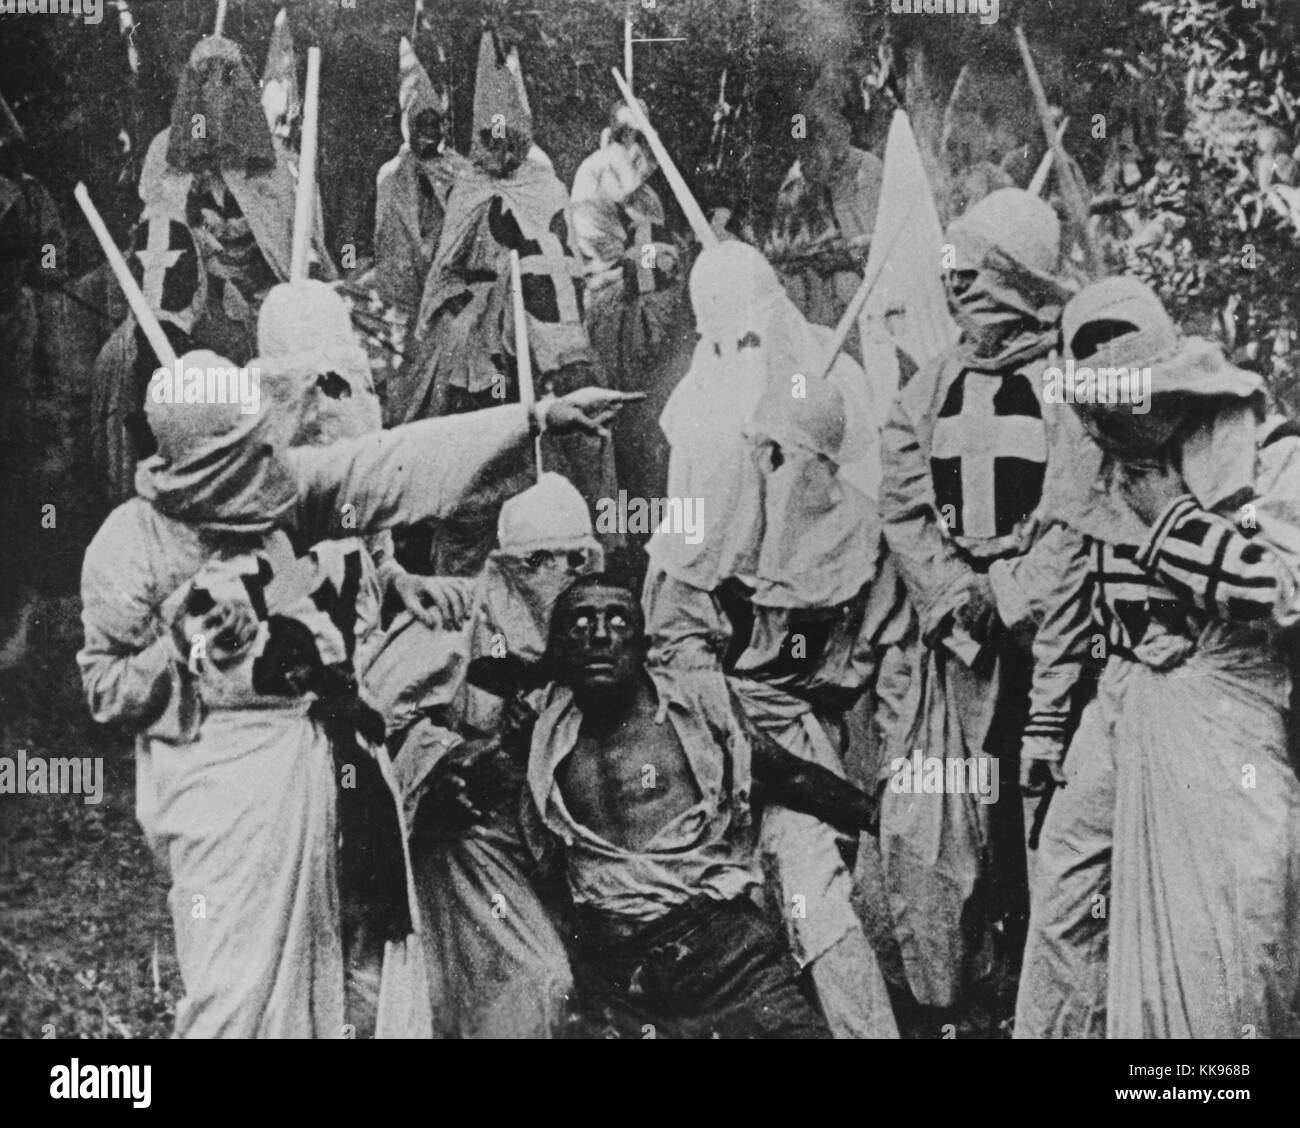 Black and white photograph of a group of Klansmen surrounding freedman Gus (played by white actor Walter Long in blackface) in a scene from director D W Griffith's motion picture 'The Birth of a Nation', 1915. From the New York Public Library. Stock Photo